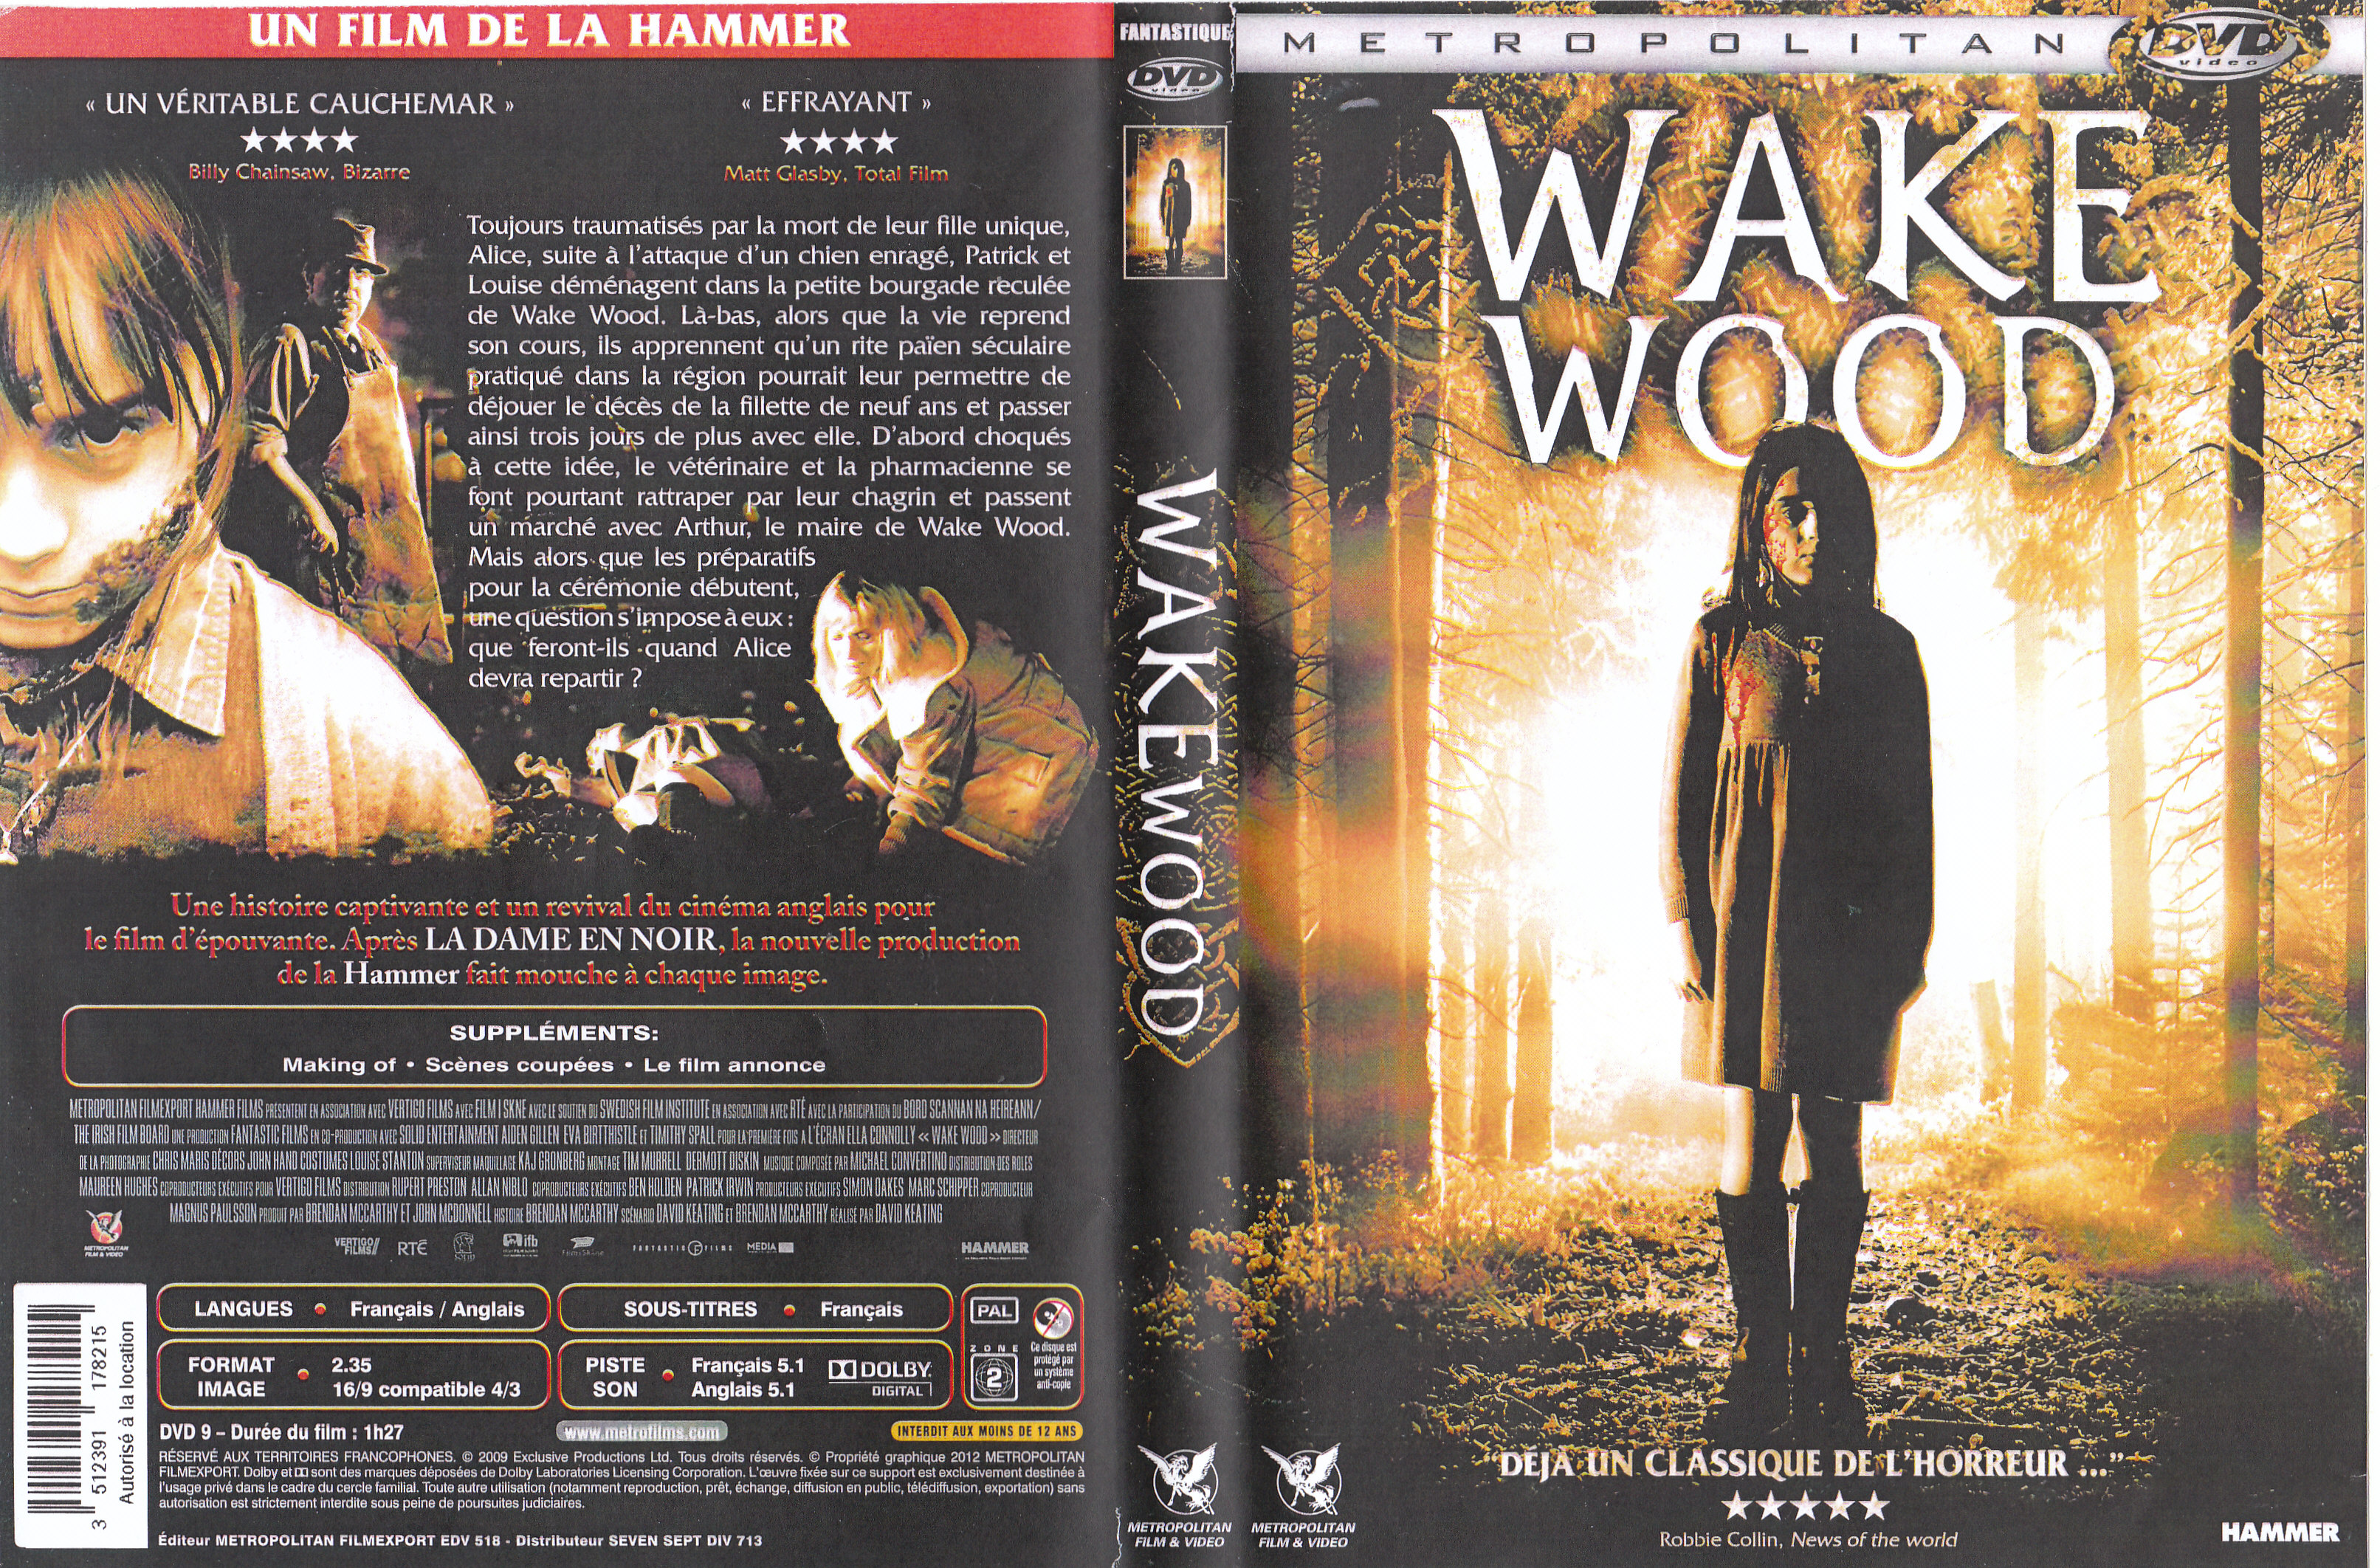 Jaquette DVD Wake Wood